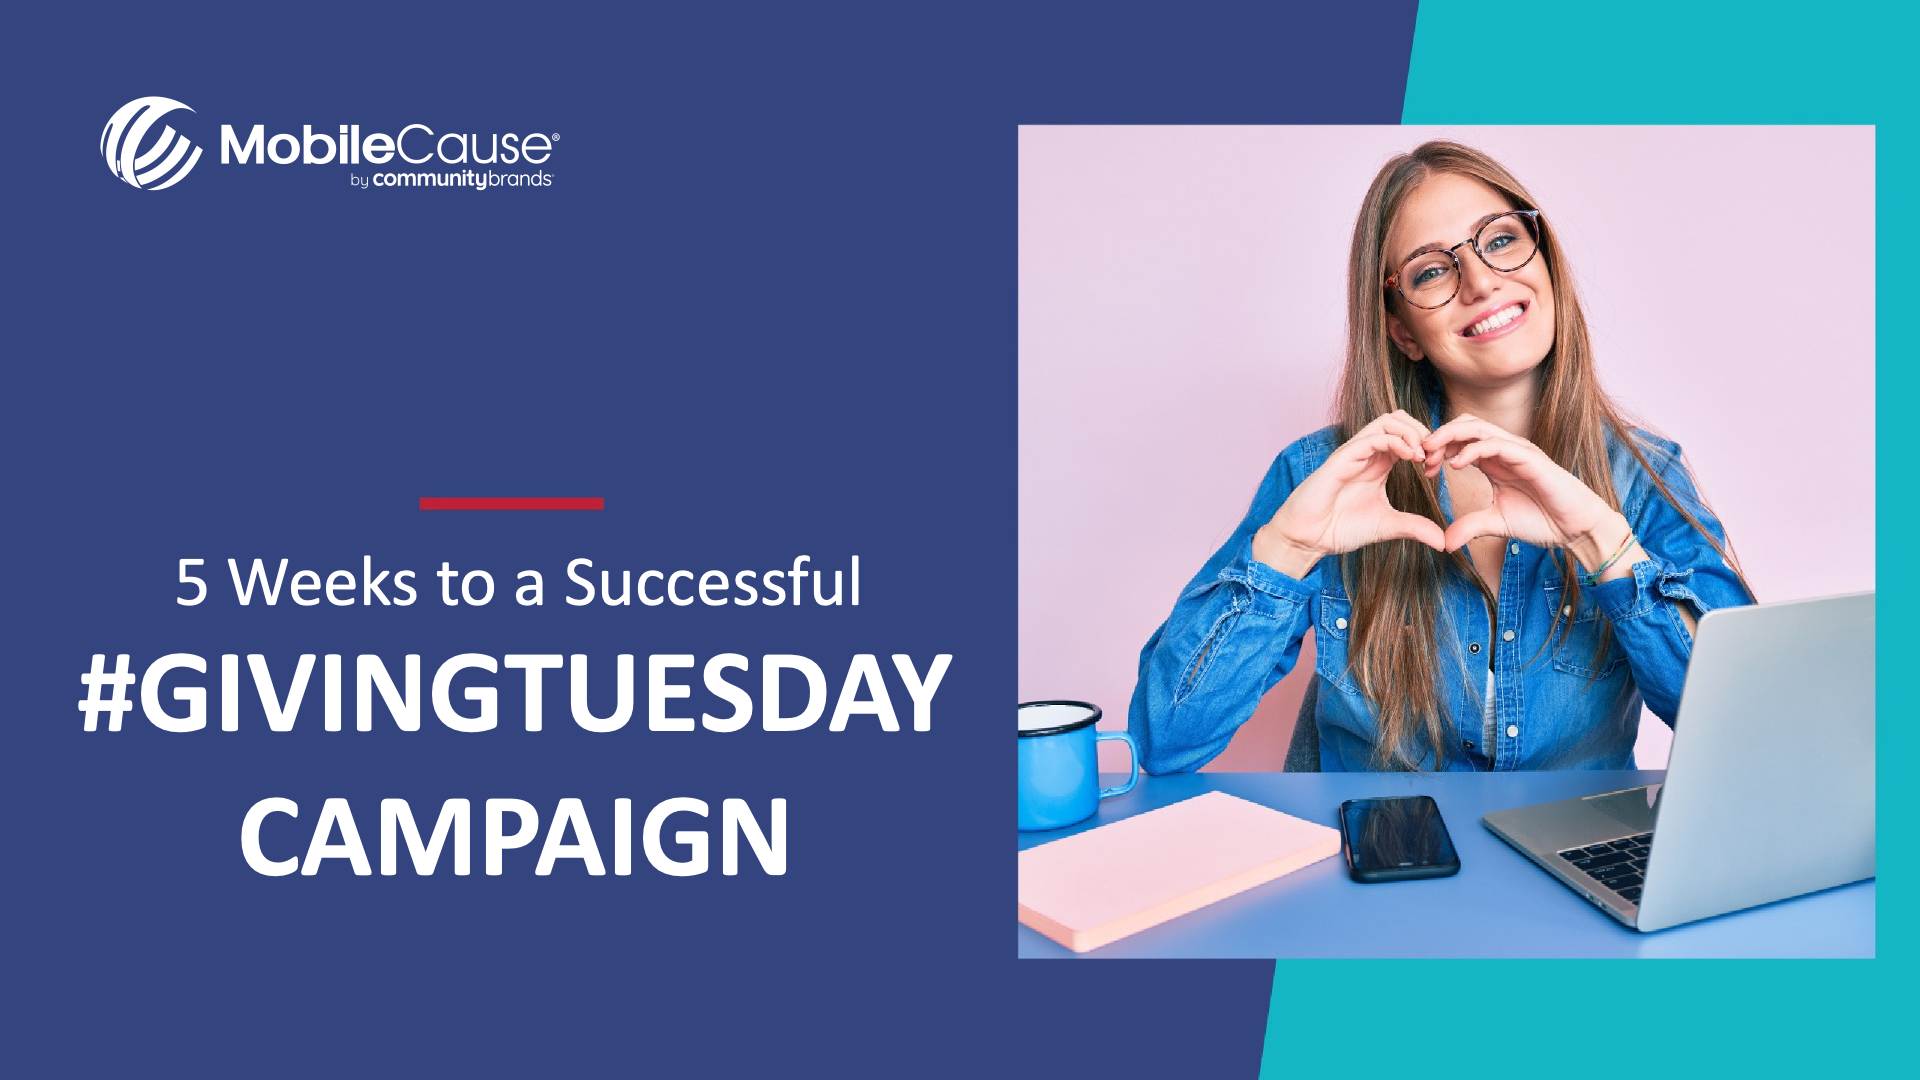 5 Weeks to a Successful #GivingTuesday